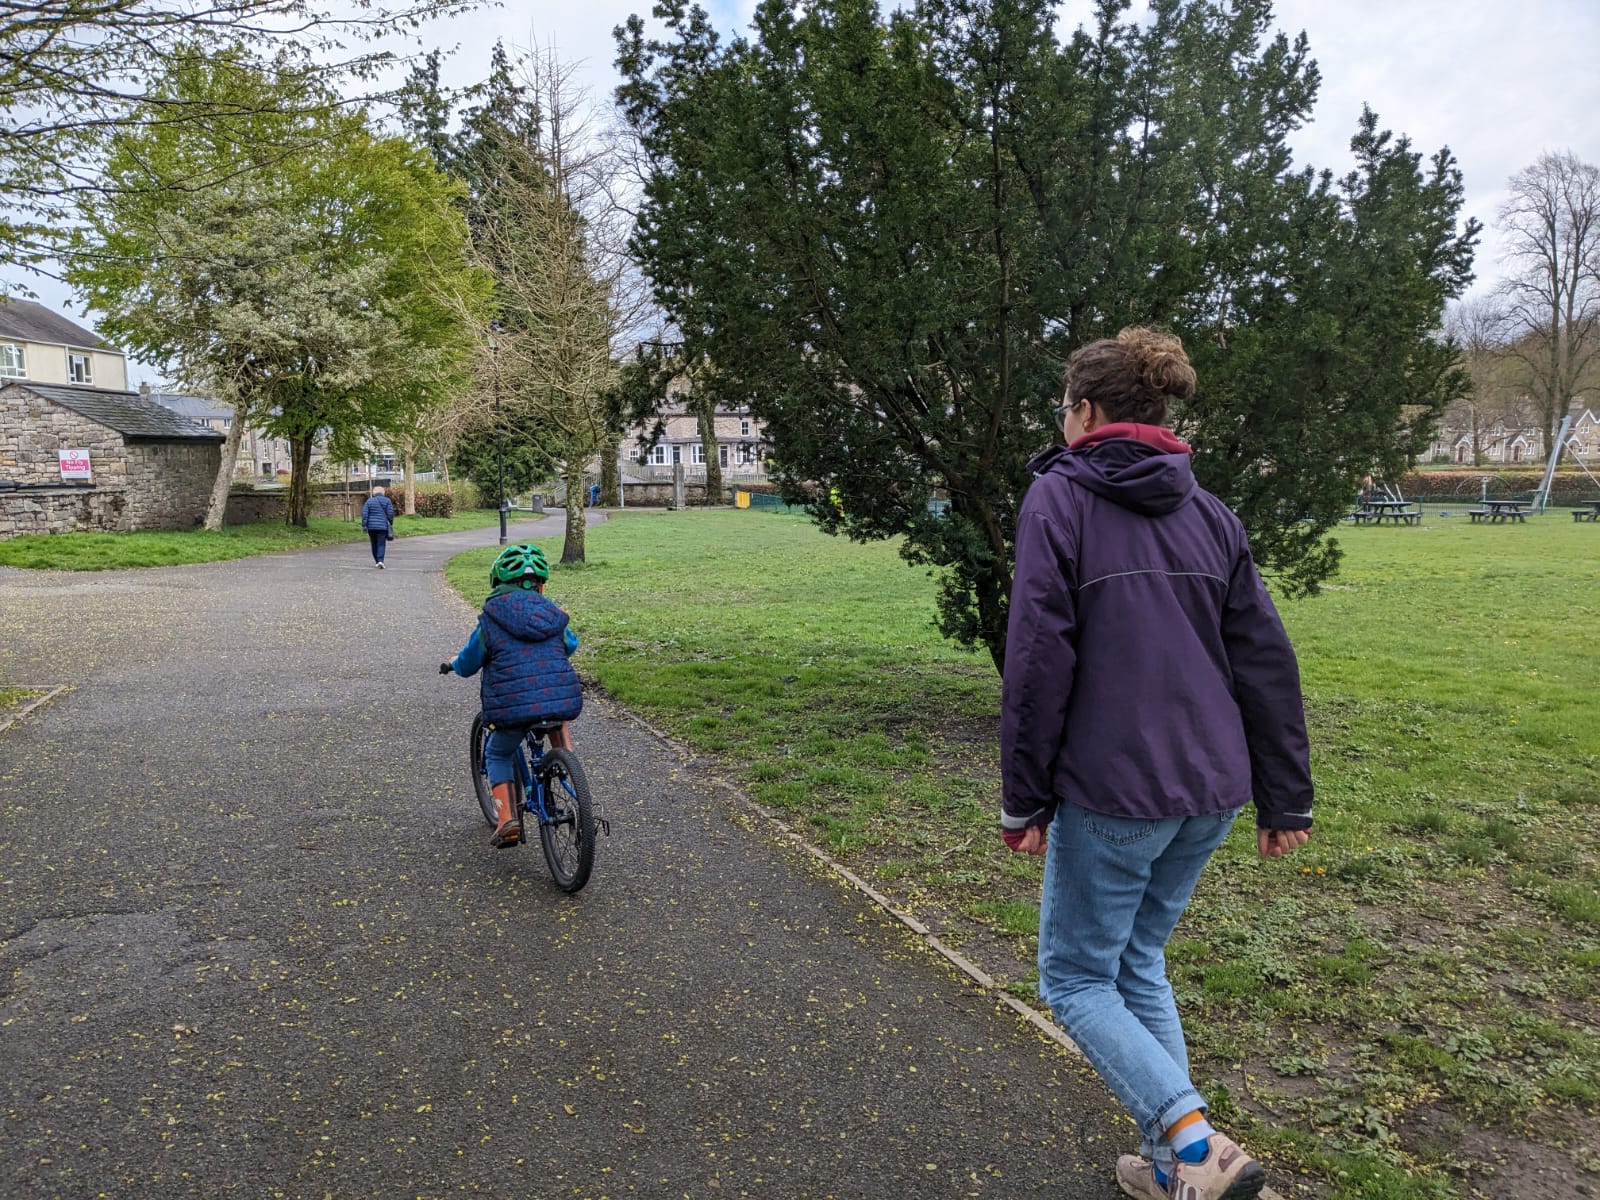 little boy learning to ride a bike and an adult in a purple jacket is running along behind